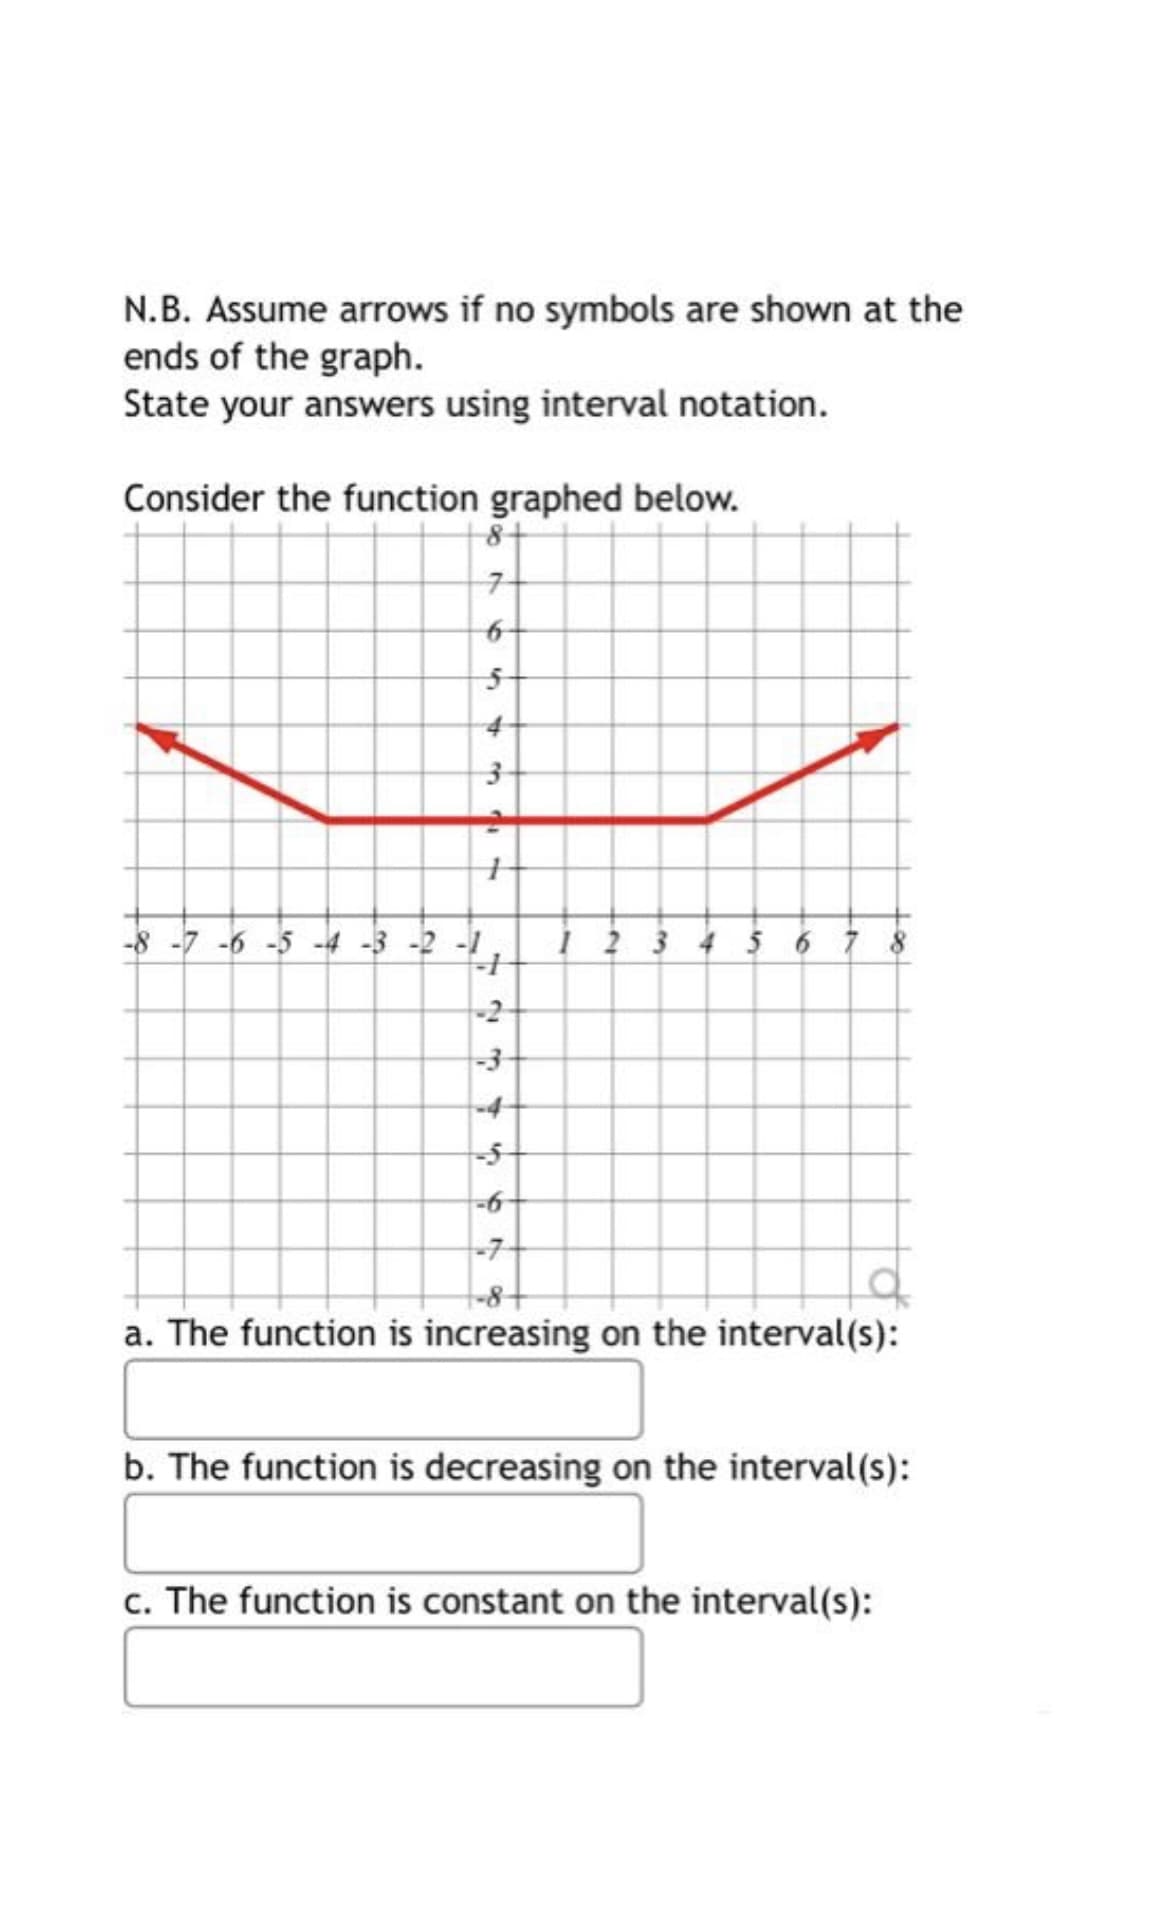 N.B. Assume arrows if no symbols are shown at the
ends of the graph.
State your answers using interval notation.
Consider the function graphed below.
-8 -7 -6 -5 -4 -3 -2 -1
1 2 3 4 5 6 7
-2
-3
-4
-7-
a. The function is increasing on the interval(s):
b. The function is decreasing on the interval(s):
c. The function is constant on the interval(s):
